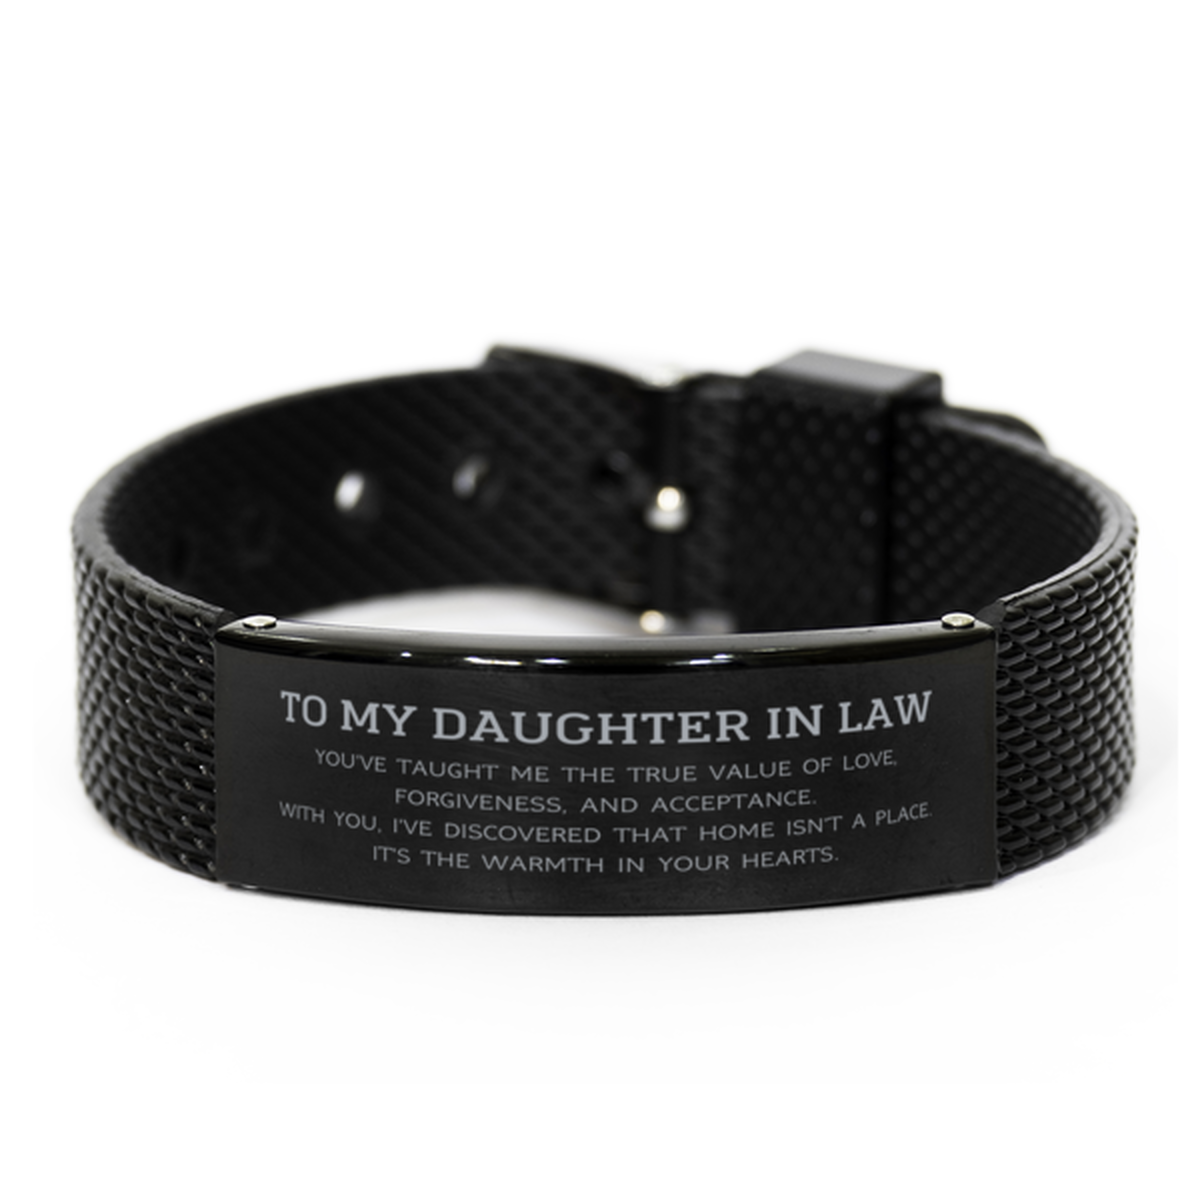 To My Daughter In Law Gifts, You've taught me the true value of love, Thank You Gifts For Daughter In Law, Birthday Black Shark Mesh Bracelet For Daughter In Law